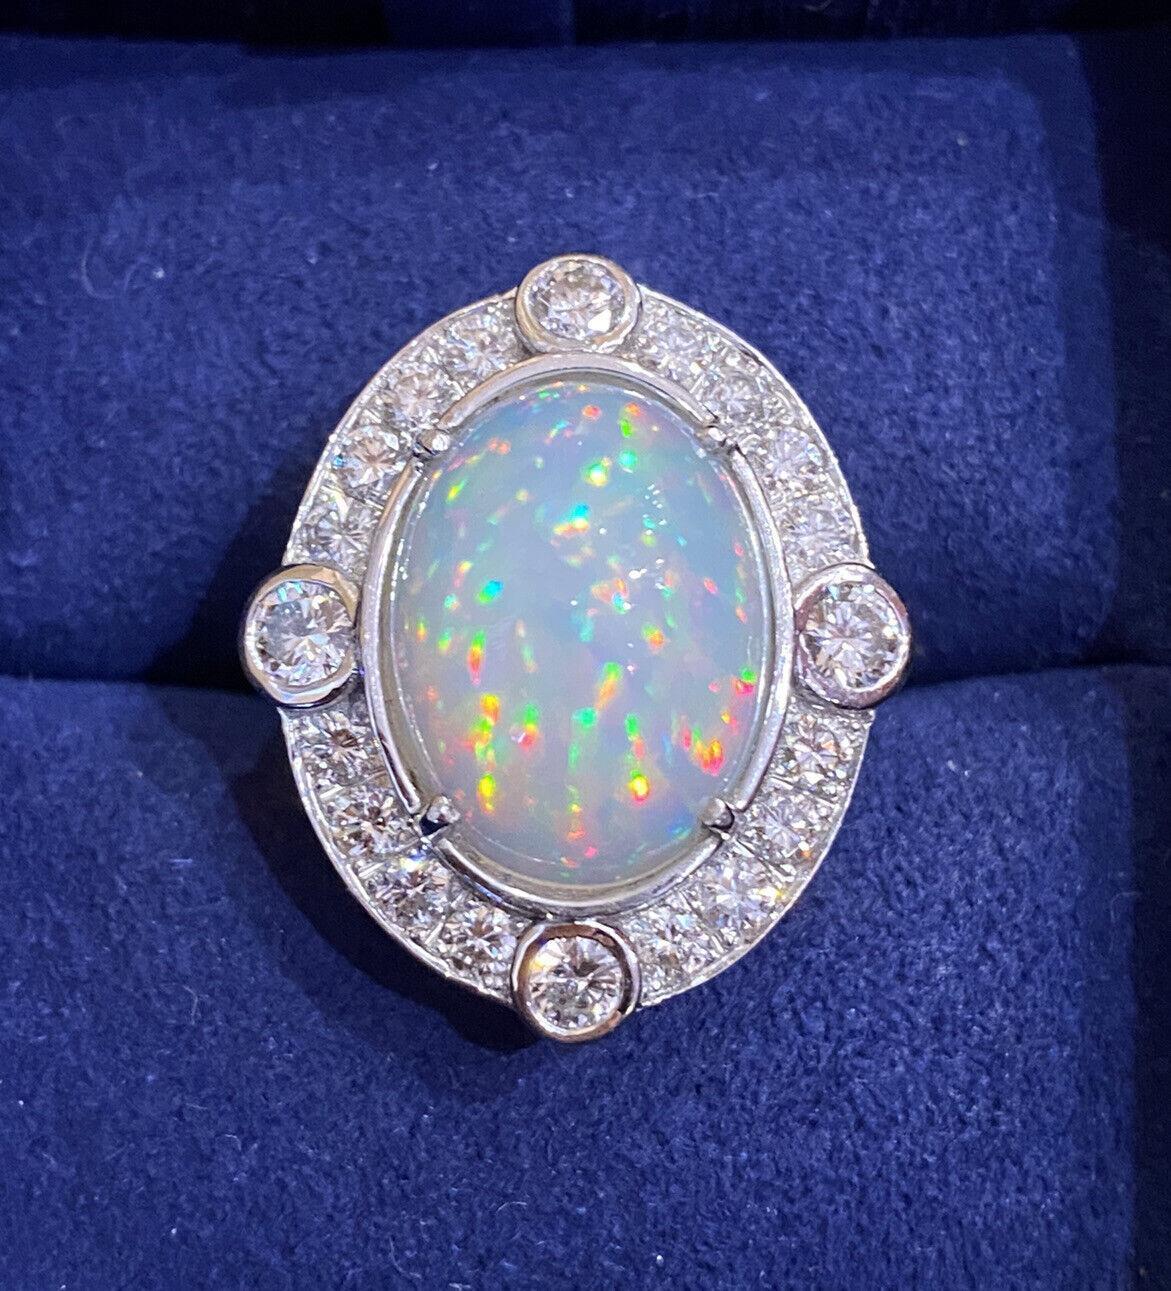 Large Ethiopian Opal Vintage Diamond Ring in 18k White Gold

Vintage Opal Diamond Ring features a large dome Oval-shaped Ethiopian Opal in the center with Flashes of Green, Orange, and Yellow accented by 20 Round Brilliant Diamonds set in 18k White